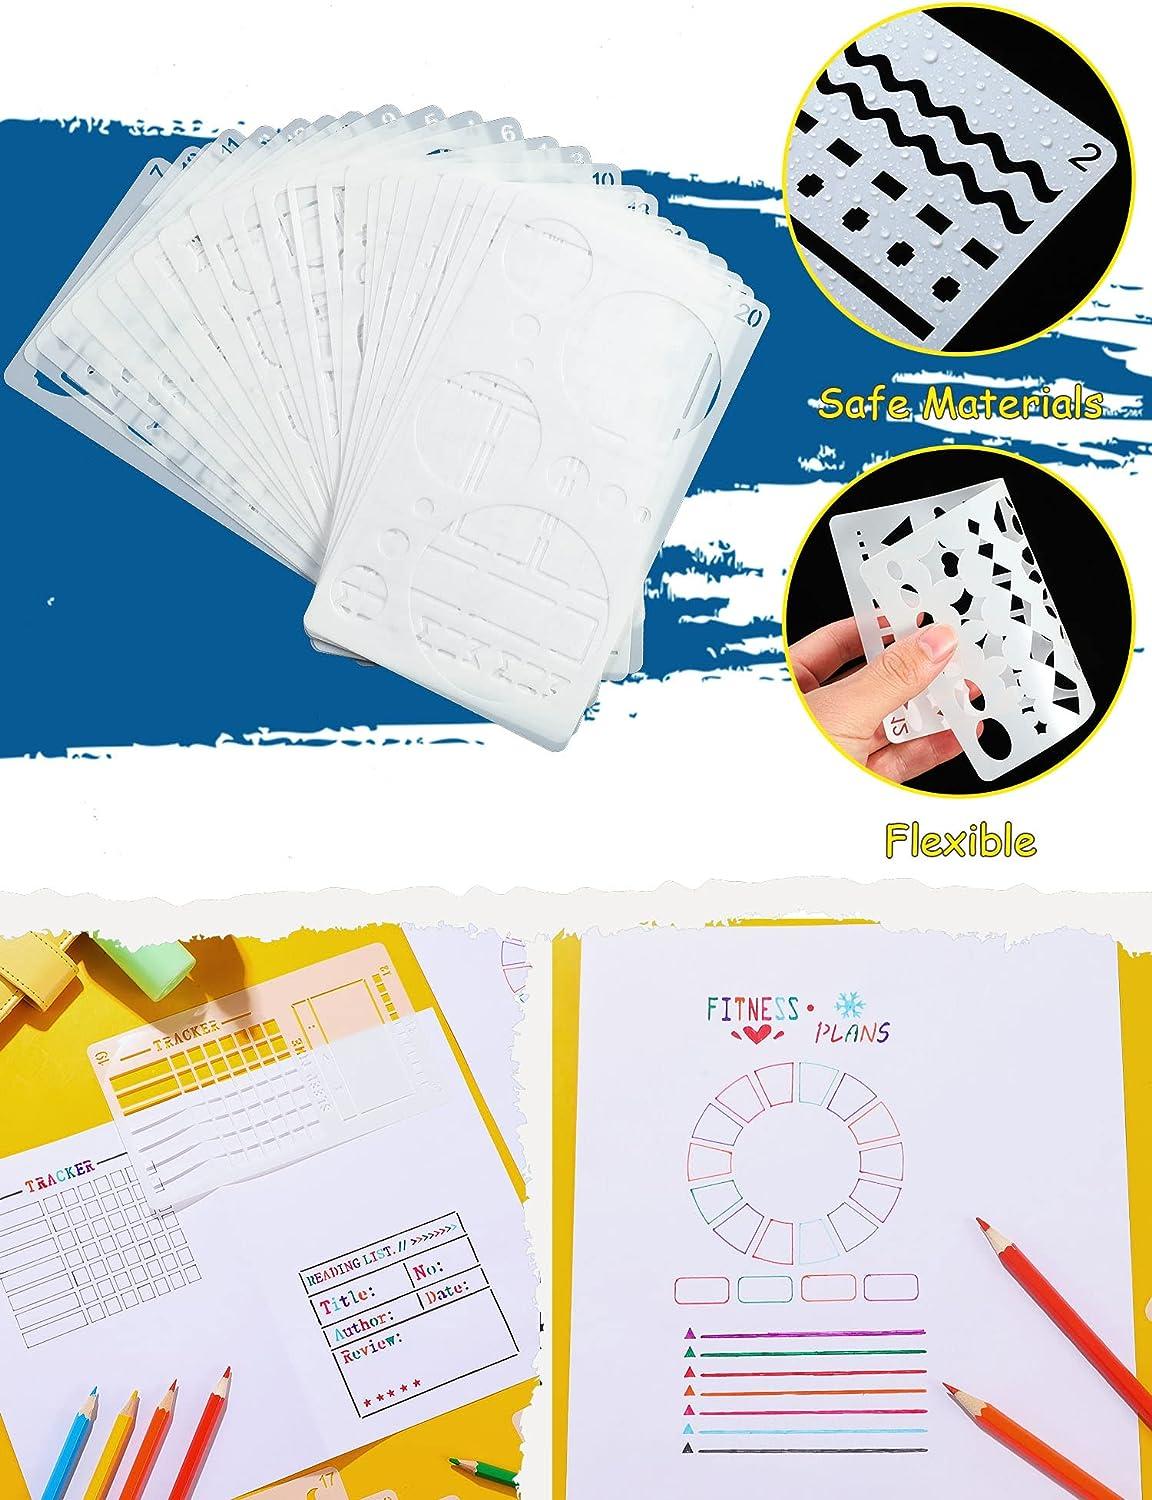 Drawing Stencils Set for Kids, 20 pcs DIY Drawing Template,Bullet Journal  Stencil,Over 300 Different Patterns,Reusable Washable Craft